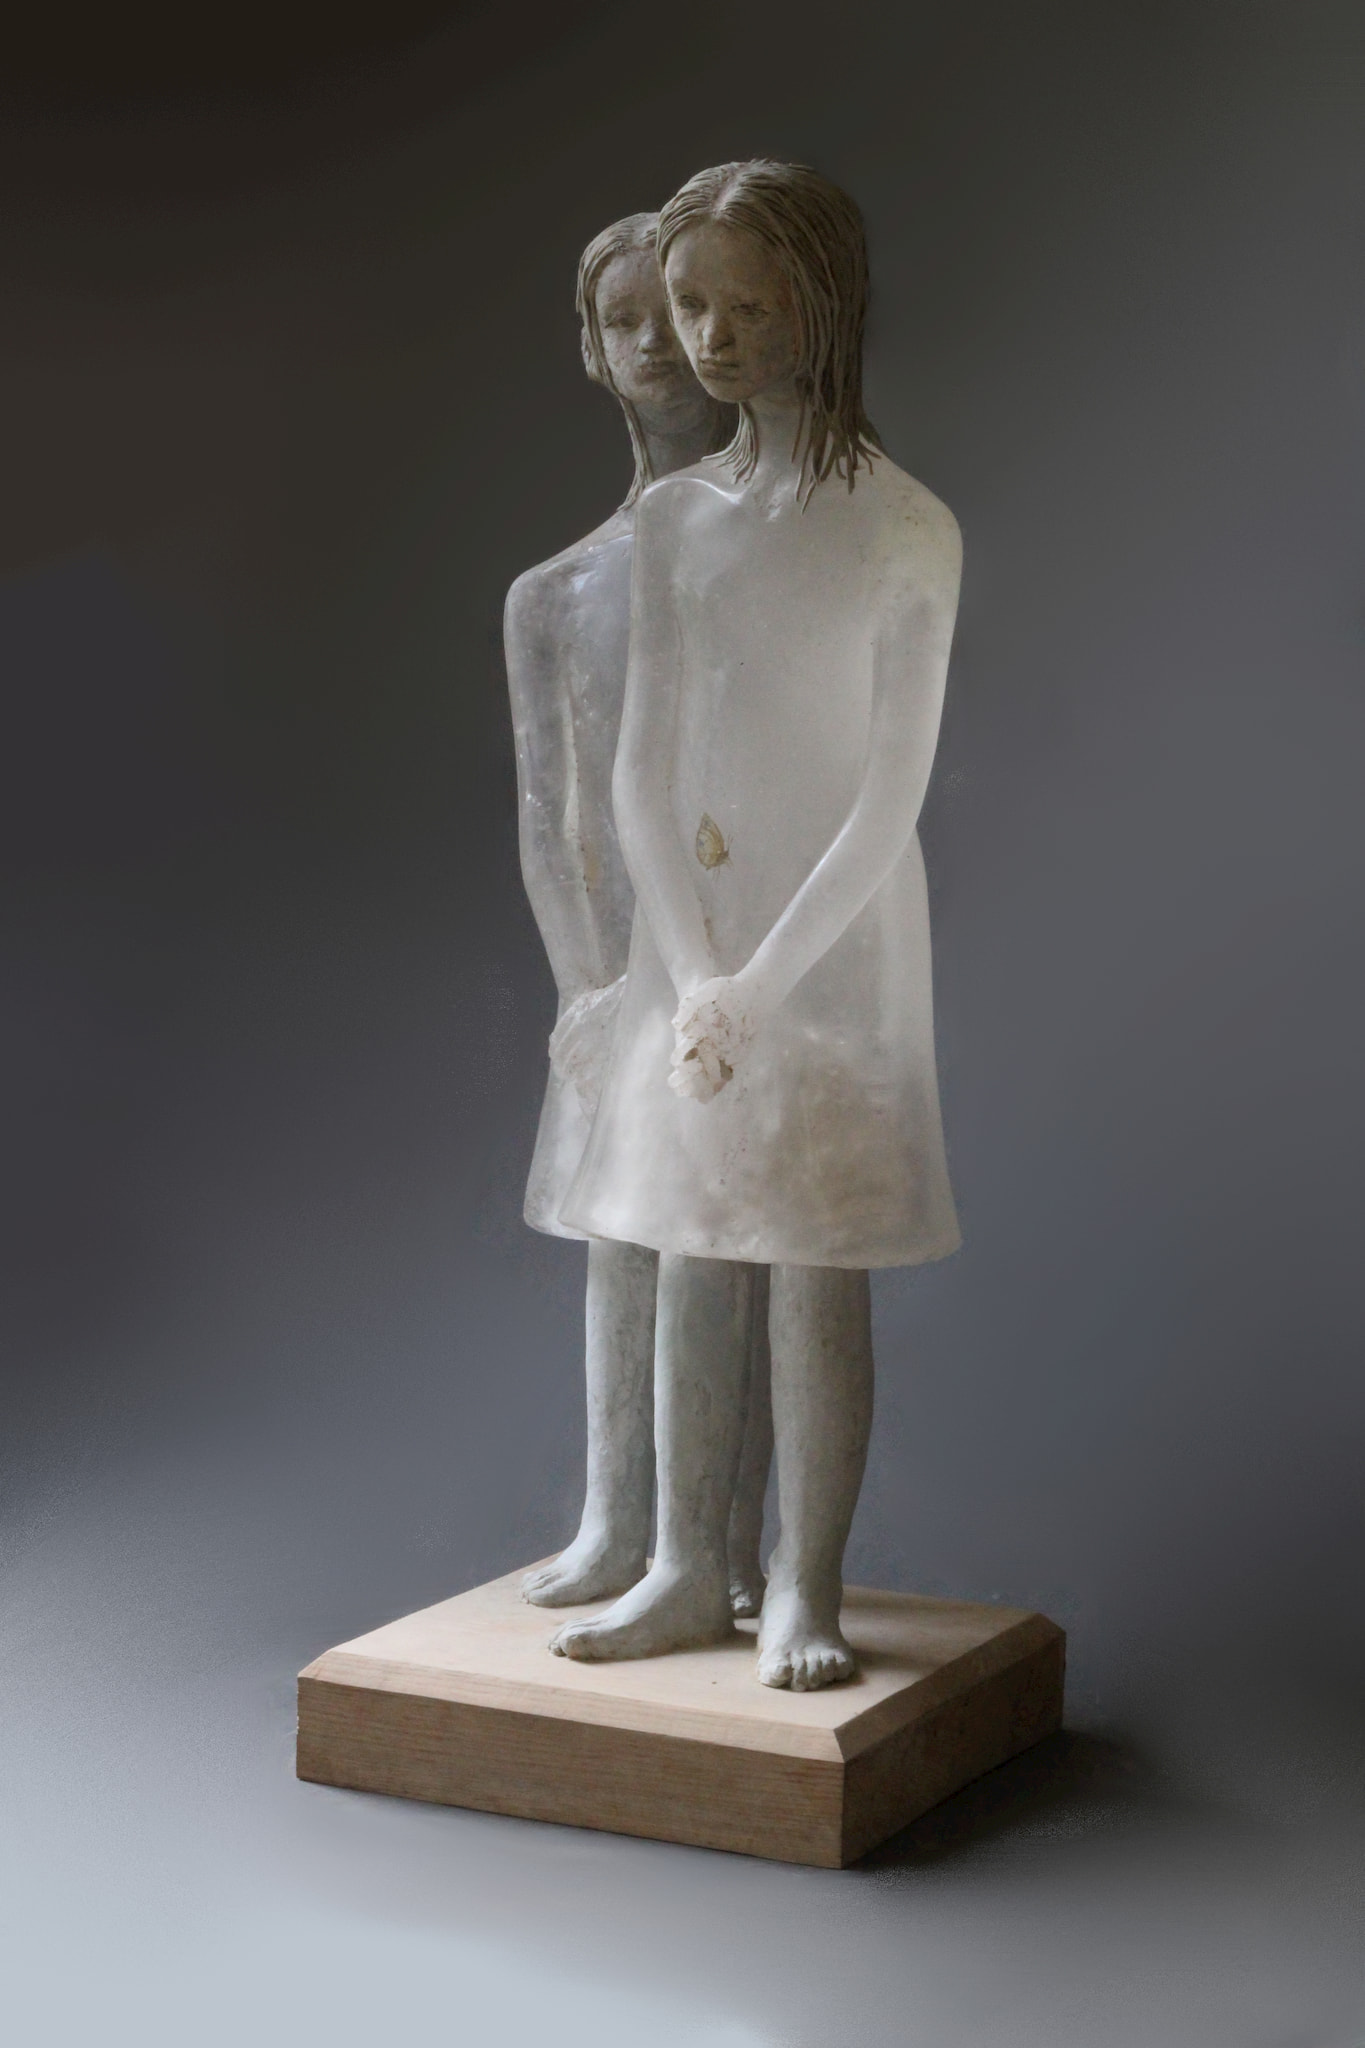 Christina Bothwell, Two Violets, Storytellers, Craft in America